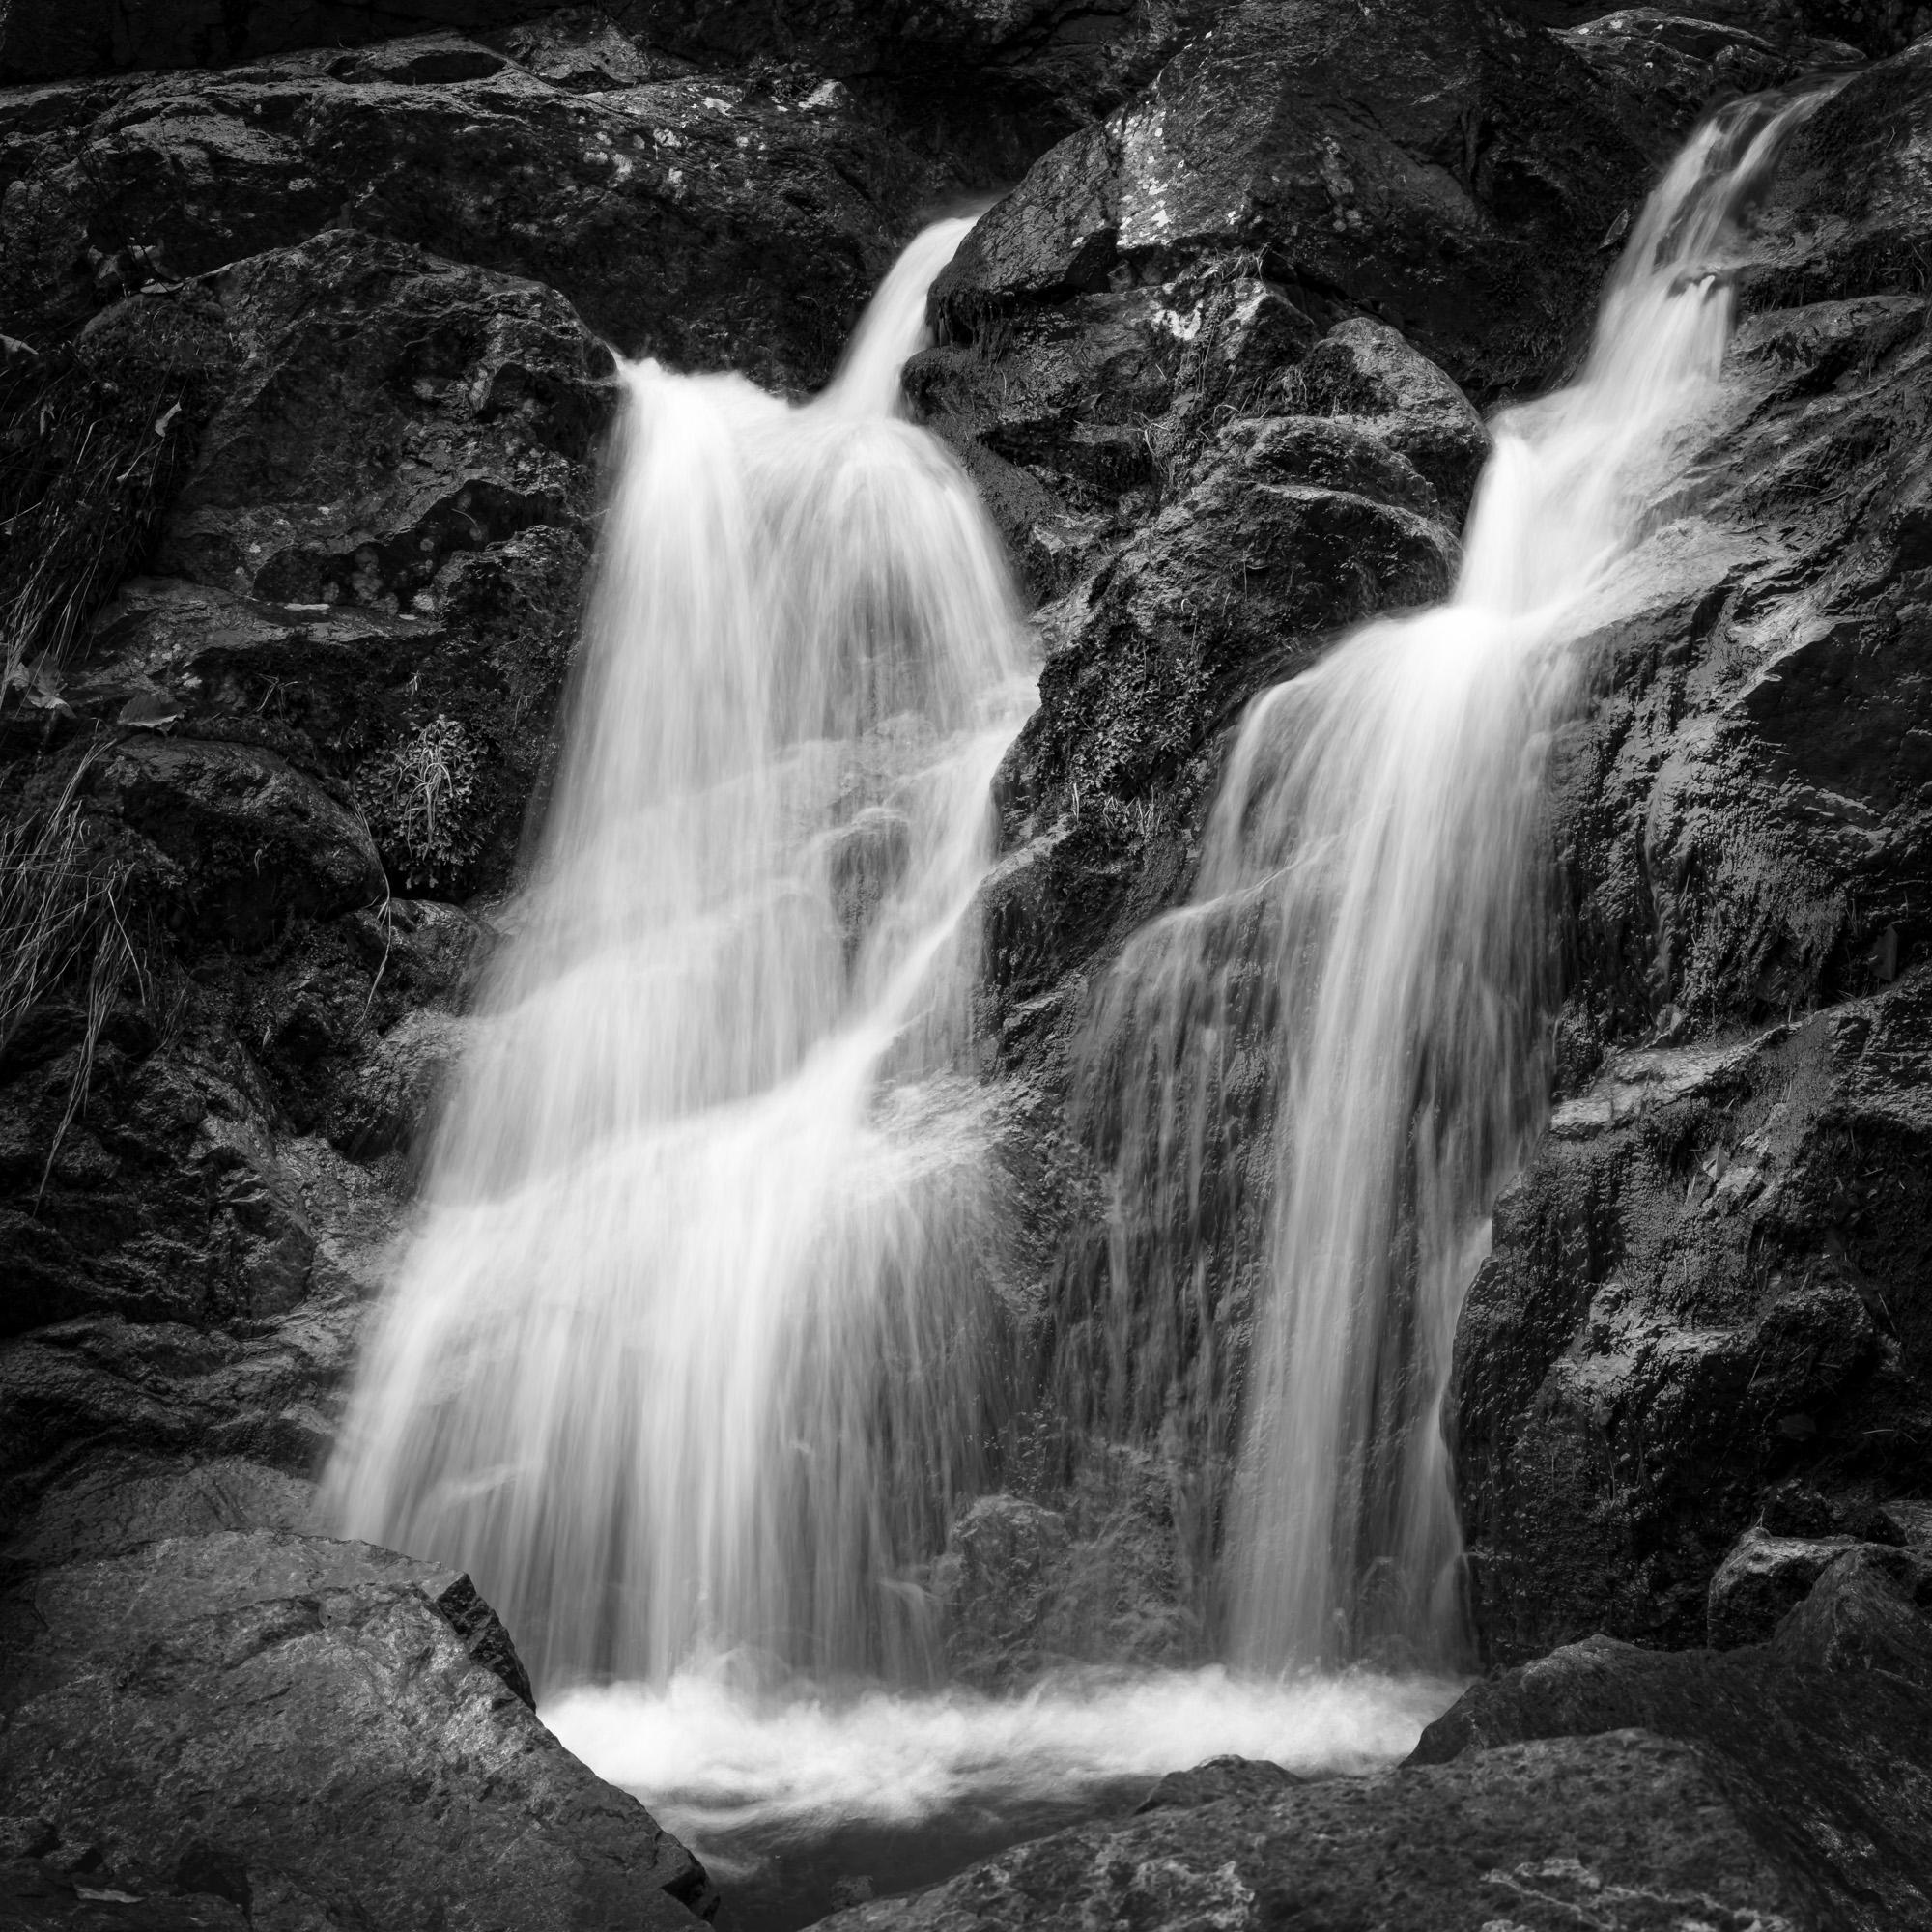 

Limited Edition Black and White Landscape Photograph, Waterfall and Pool 20 x 24

This "Waterfall and Pool" image taken in 2020 in upstate Connecticut.

About Howard Lewis:
Lewis’ artistic practice often explores science, engineering, technology,